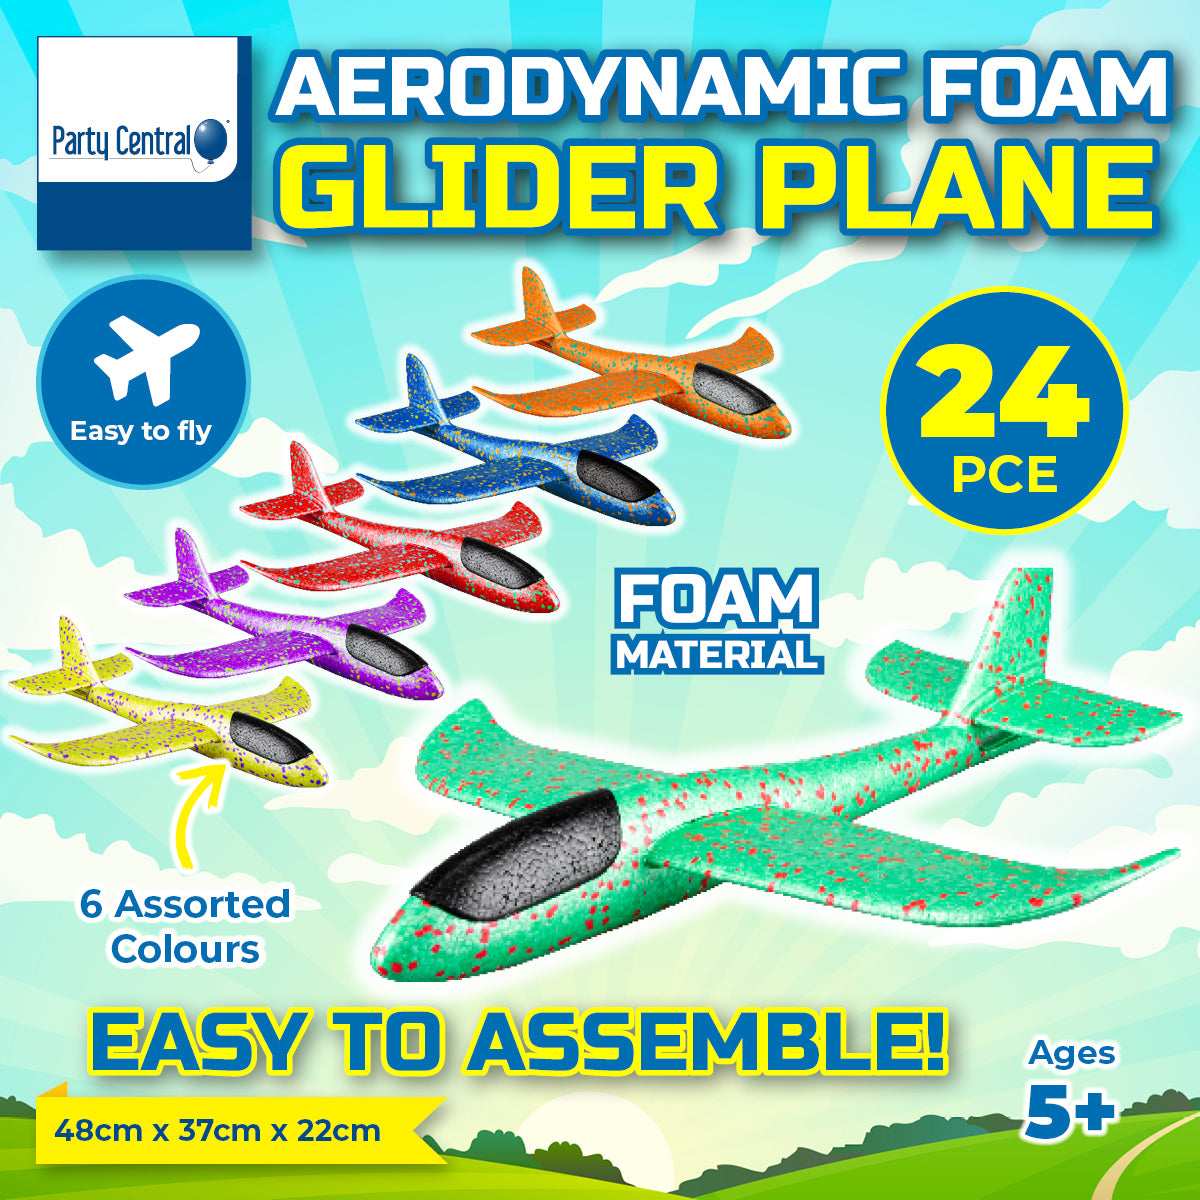 Party Central 24PCE Aerodynamic Foam Glider Planes Various Colours 37 x 48cm